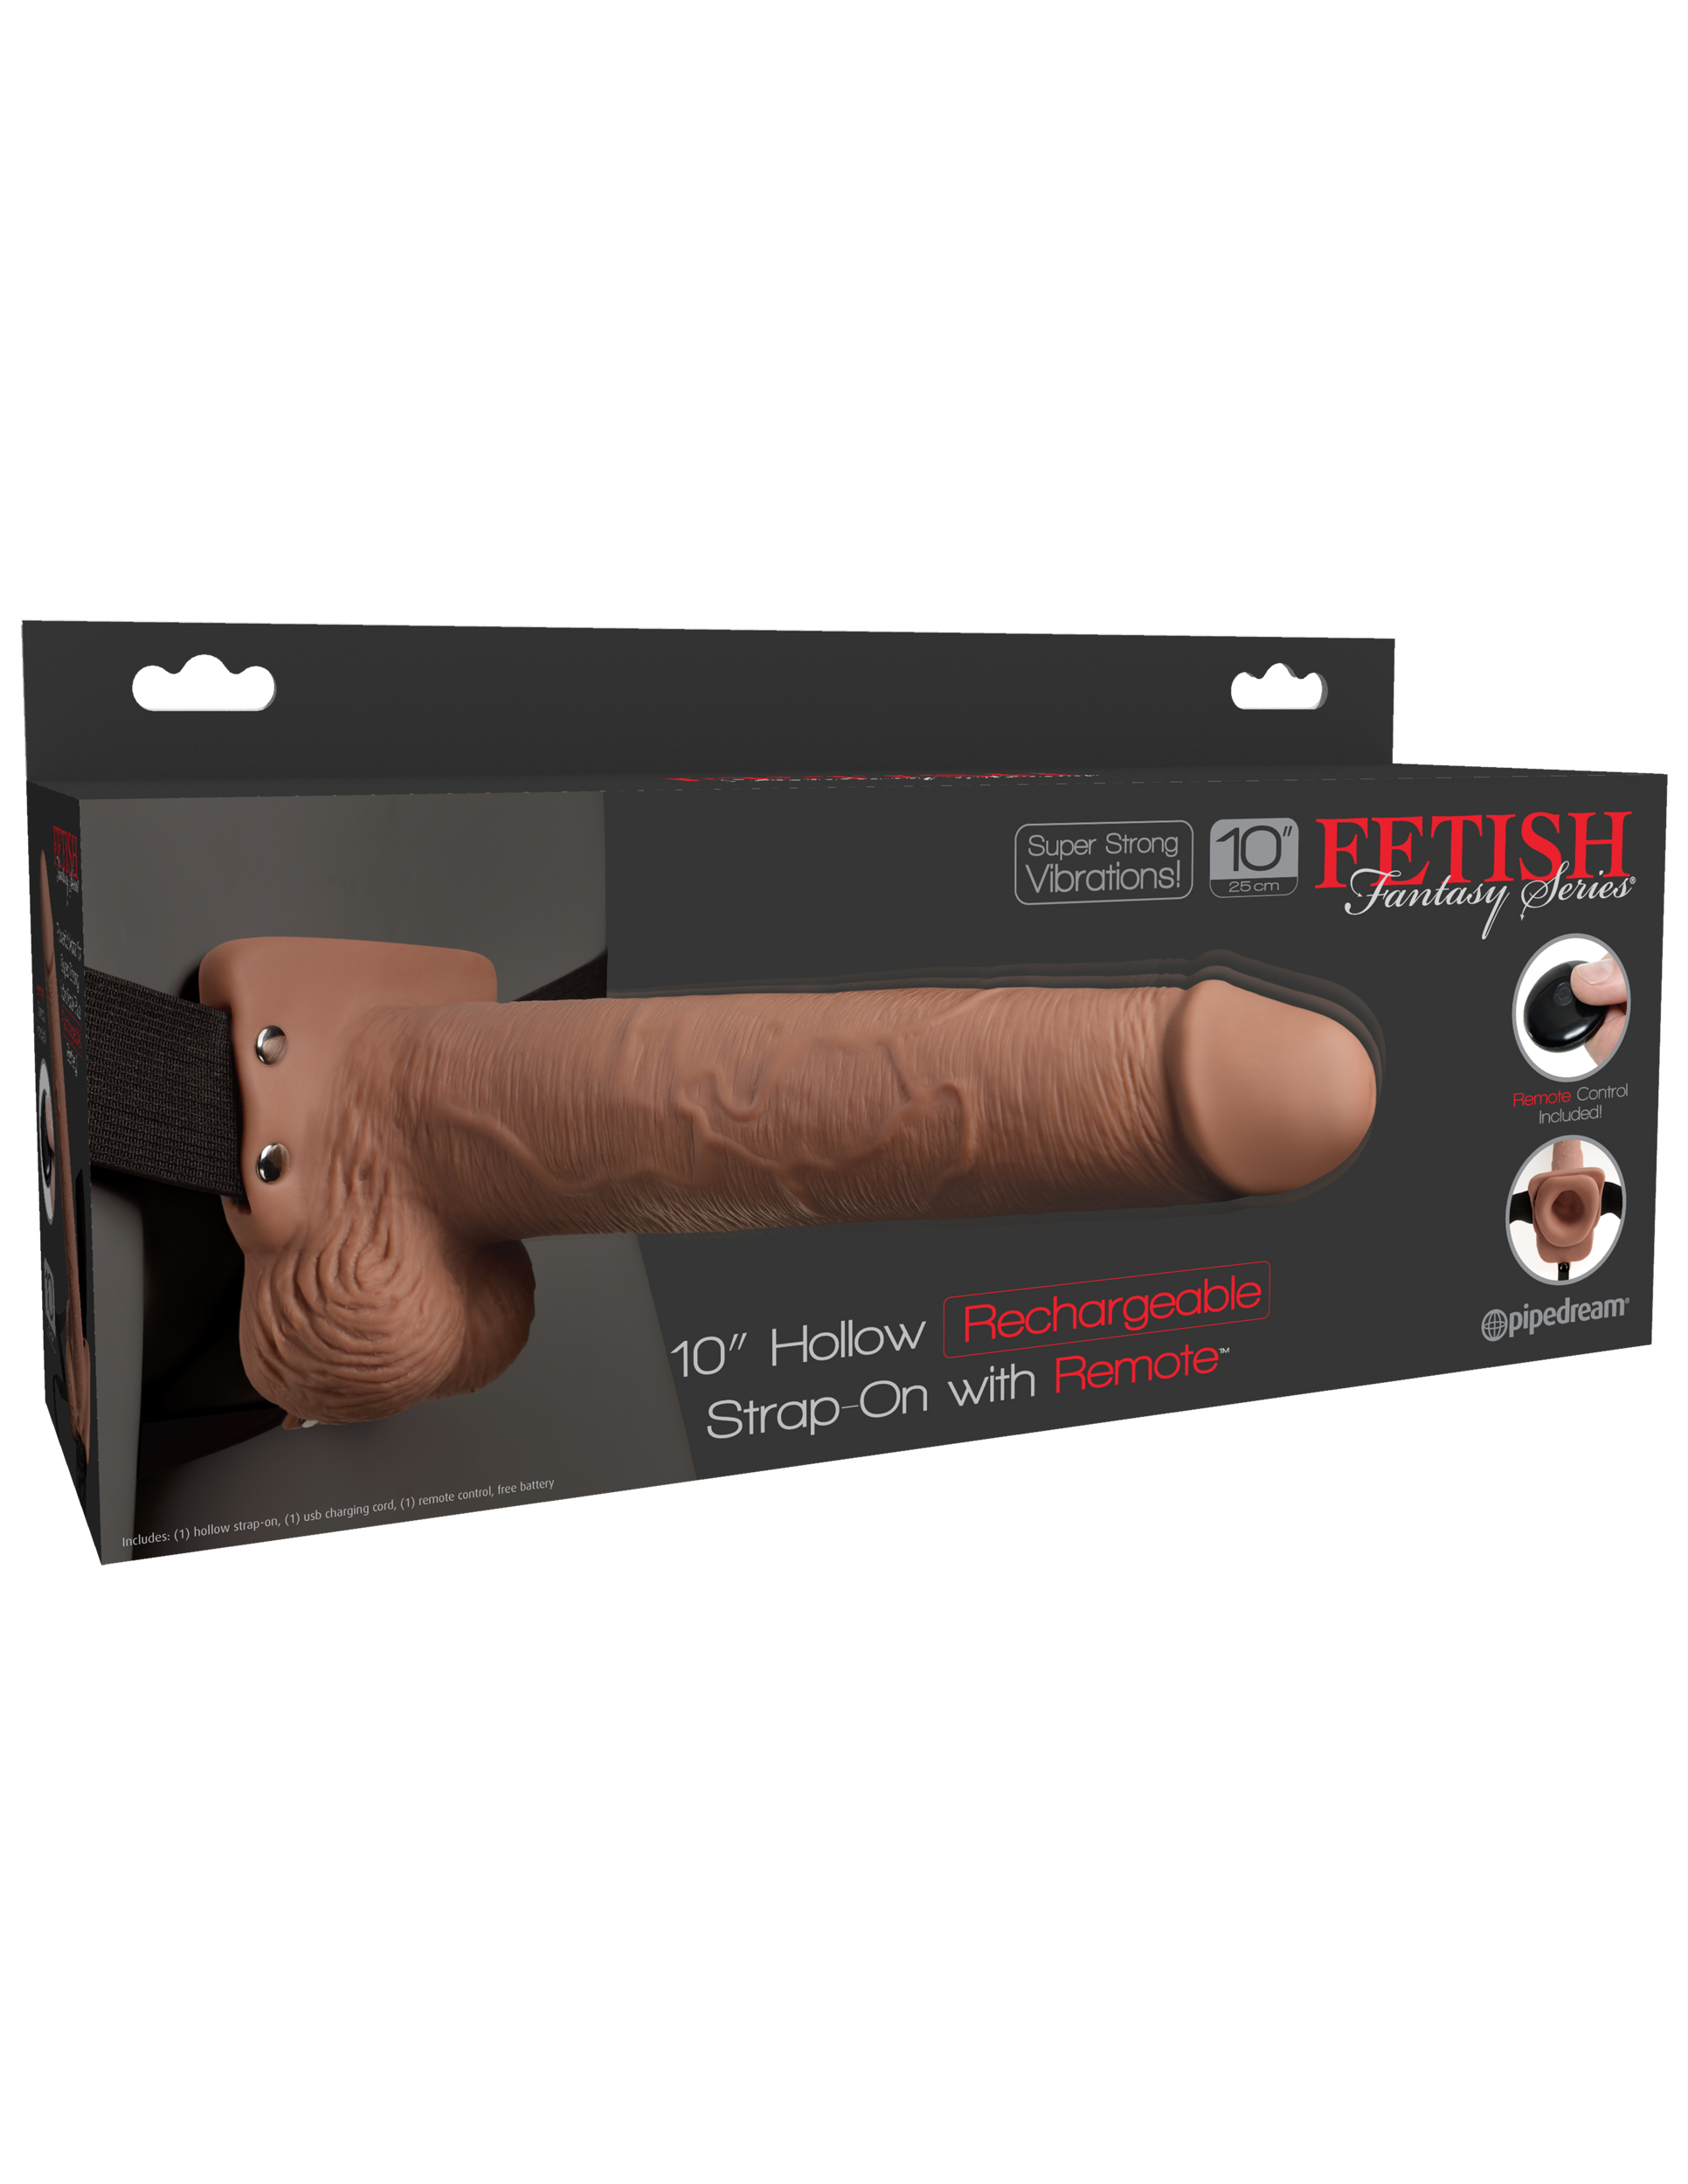 fetish fantasy series  inch hollow rechargeable strap on with remote tan 